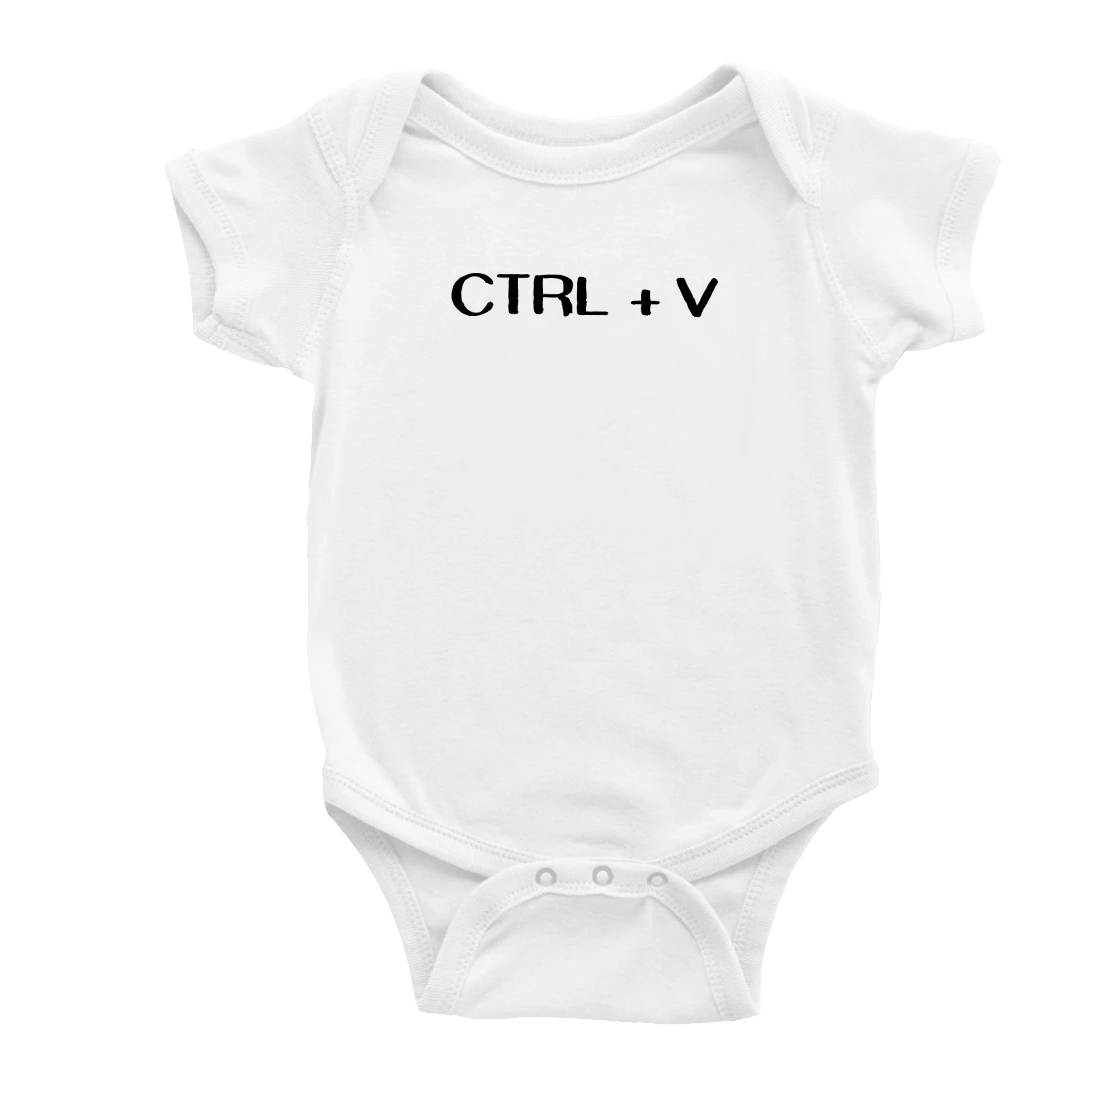 Twin Babys Funny Ctrl + C Ctrl + V Printed Infant Baby Cotton Bodysuits (White, 0-3M) - image 3 of 5